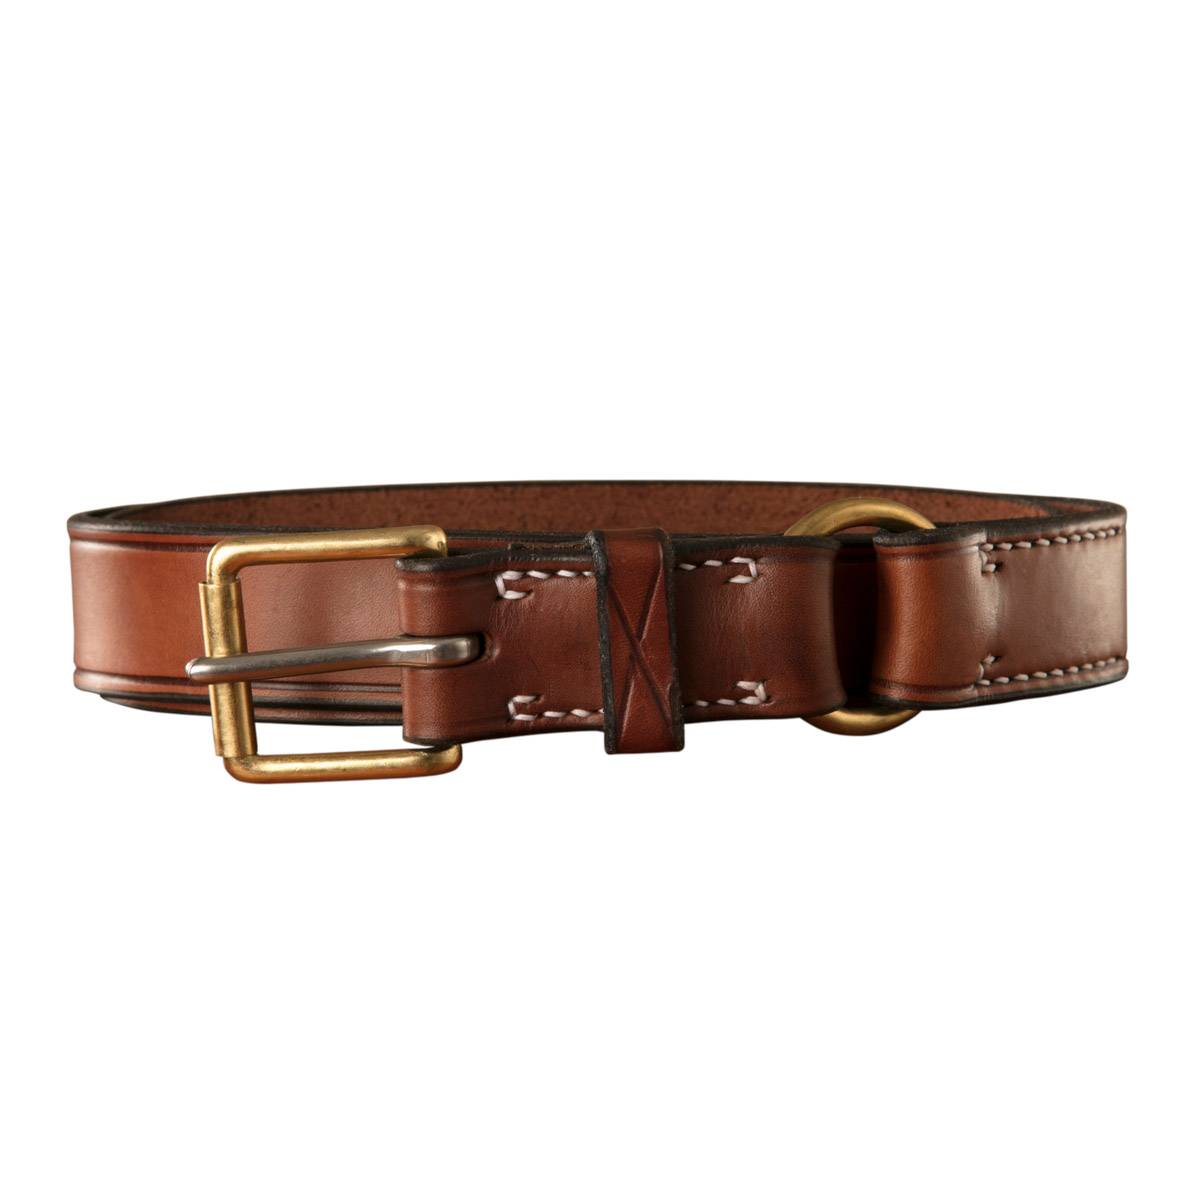 Stockmans Belt, Solid Leather, with Brass Roller Buckle and Ring 1